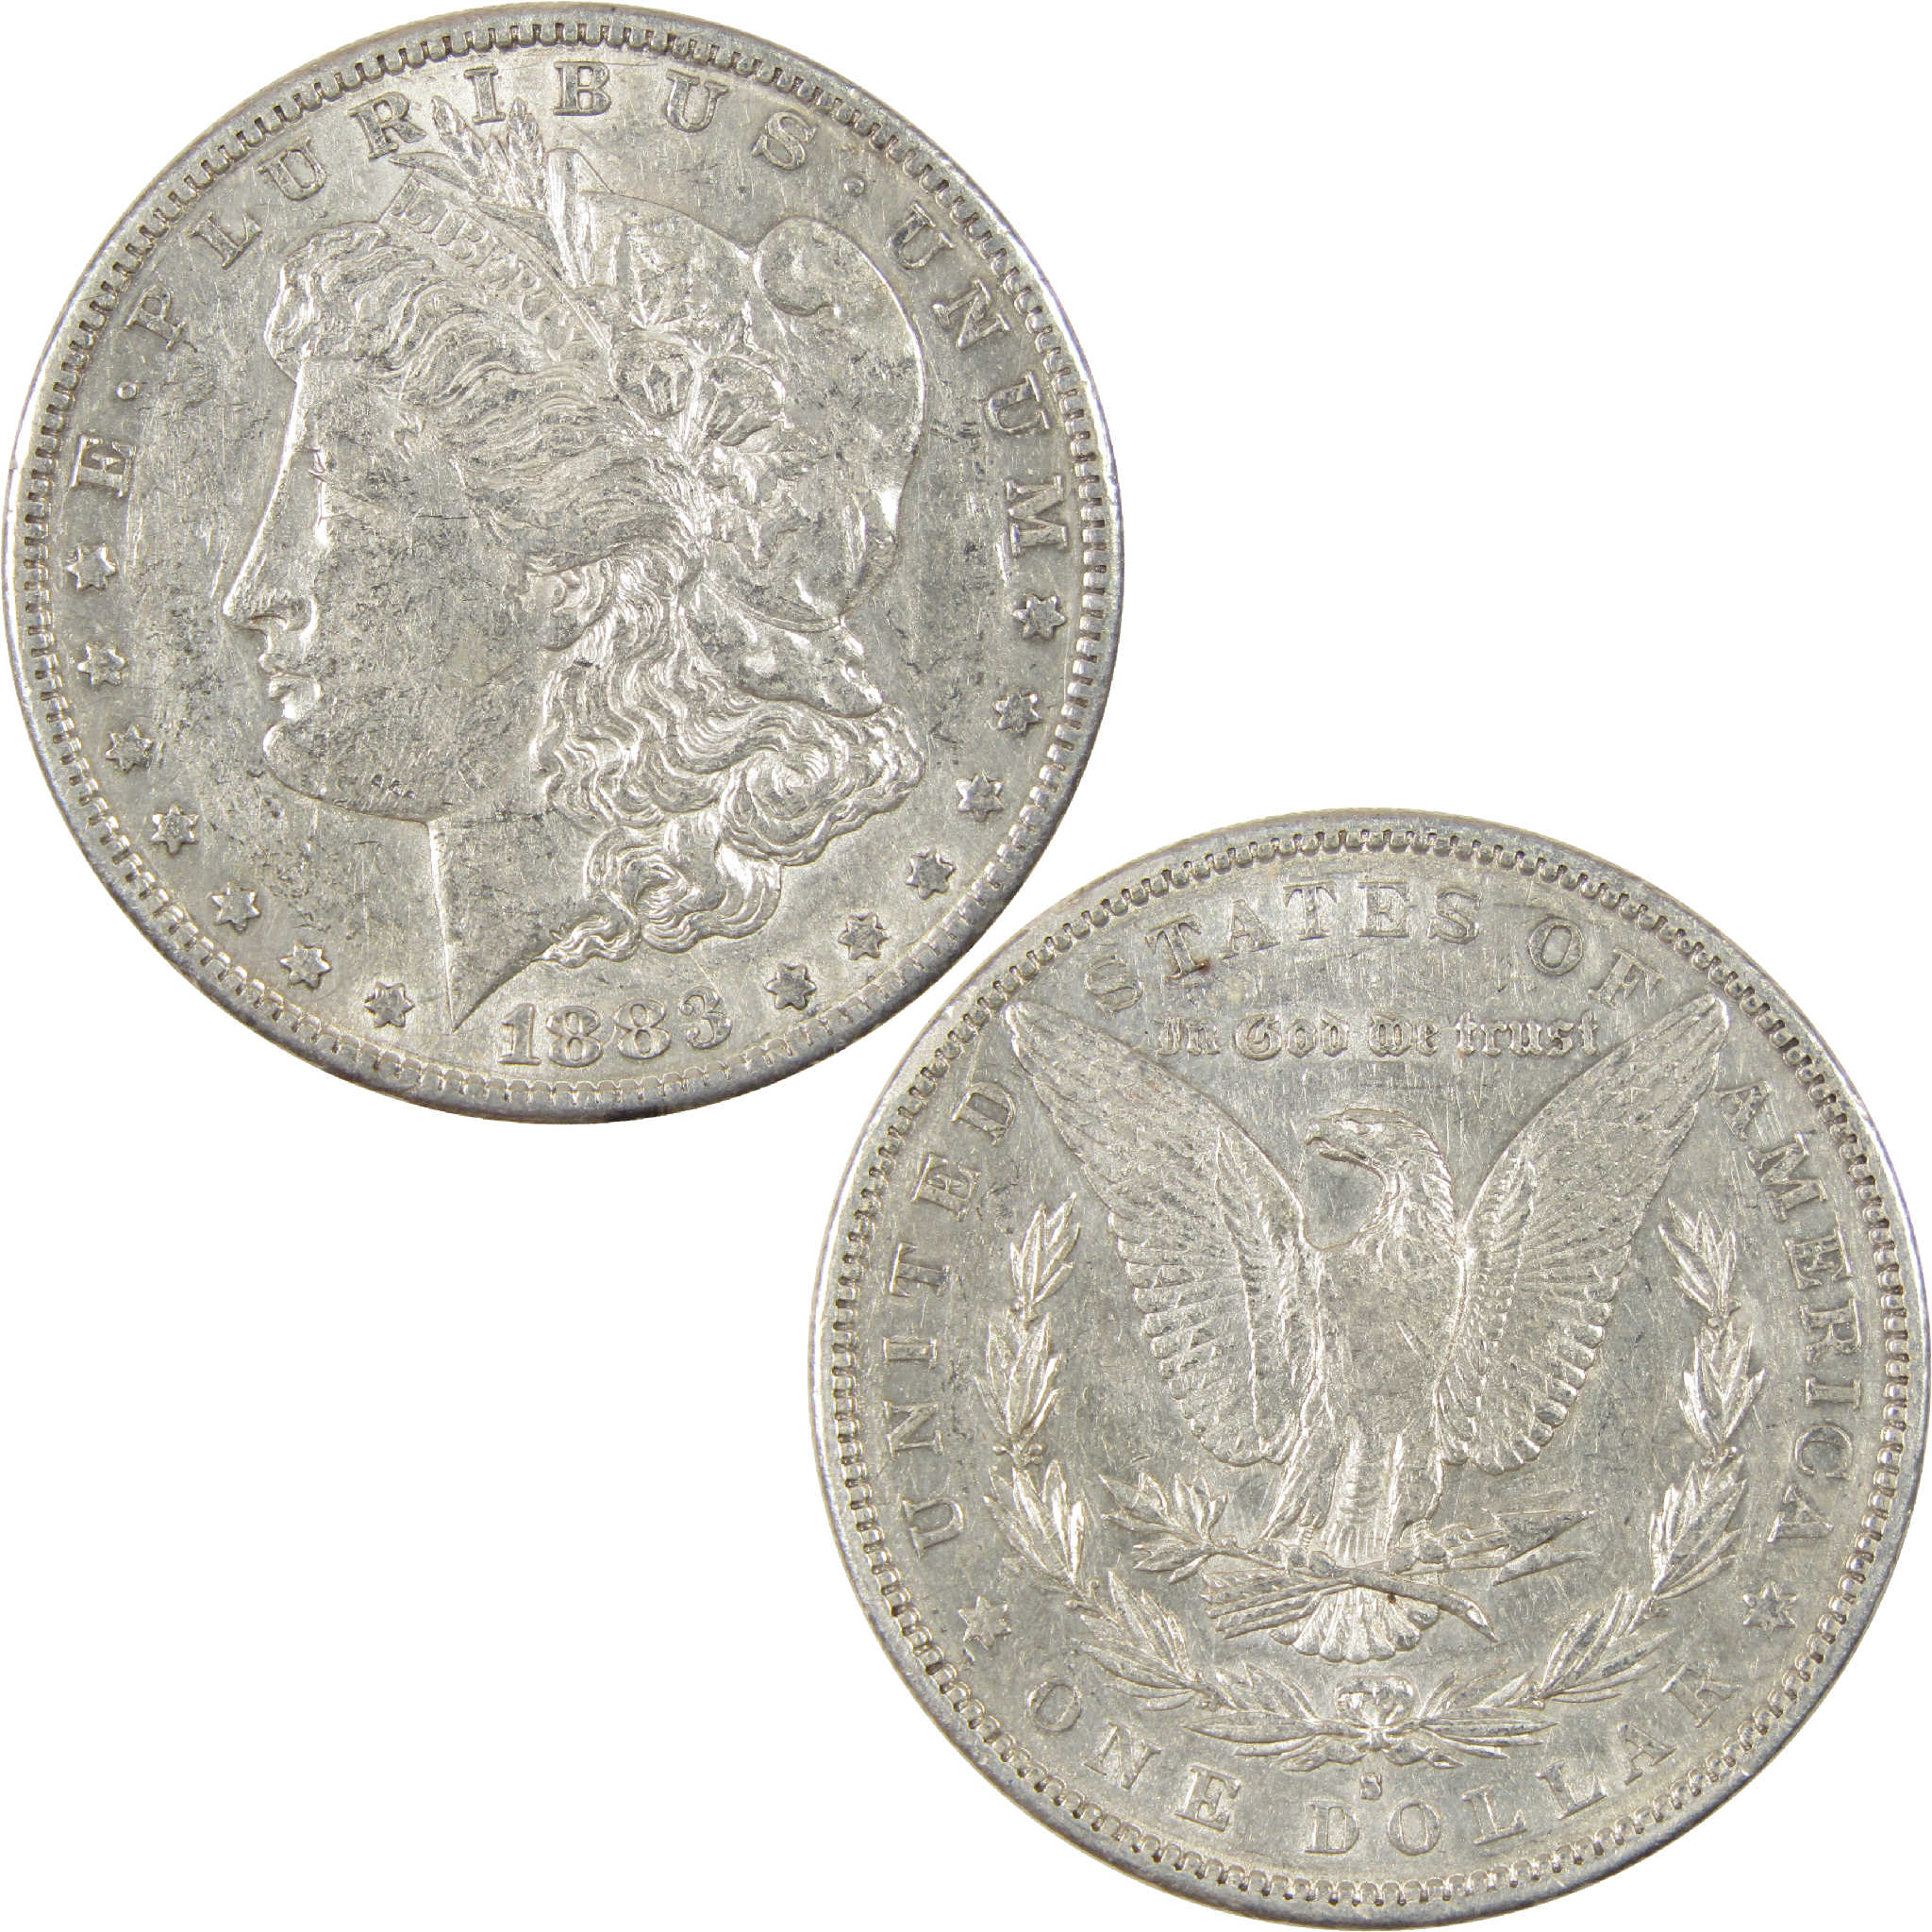 1883 S Morgan Dollar XF EF Extremely Fine Silver $1 Coin SKU:I11276 - Morgan coin - Morgan silver dollar - Morgan silver dollar for sale - Profile Coins &amp; Collectibles